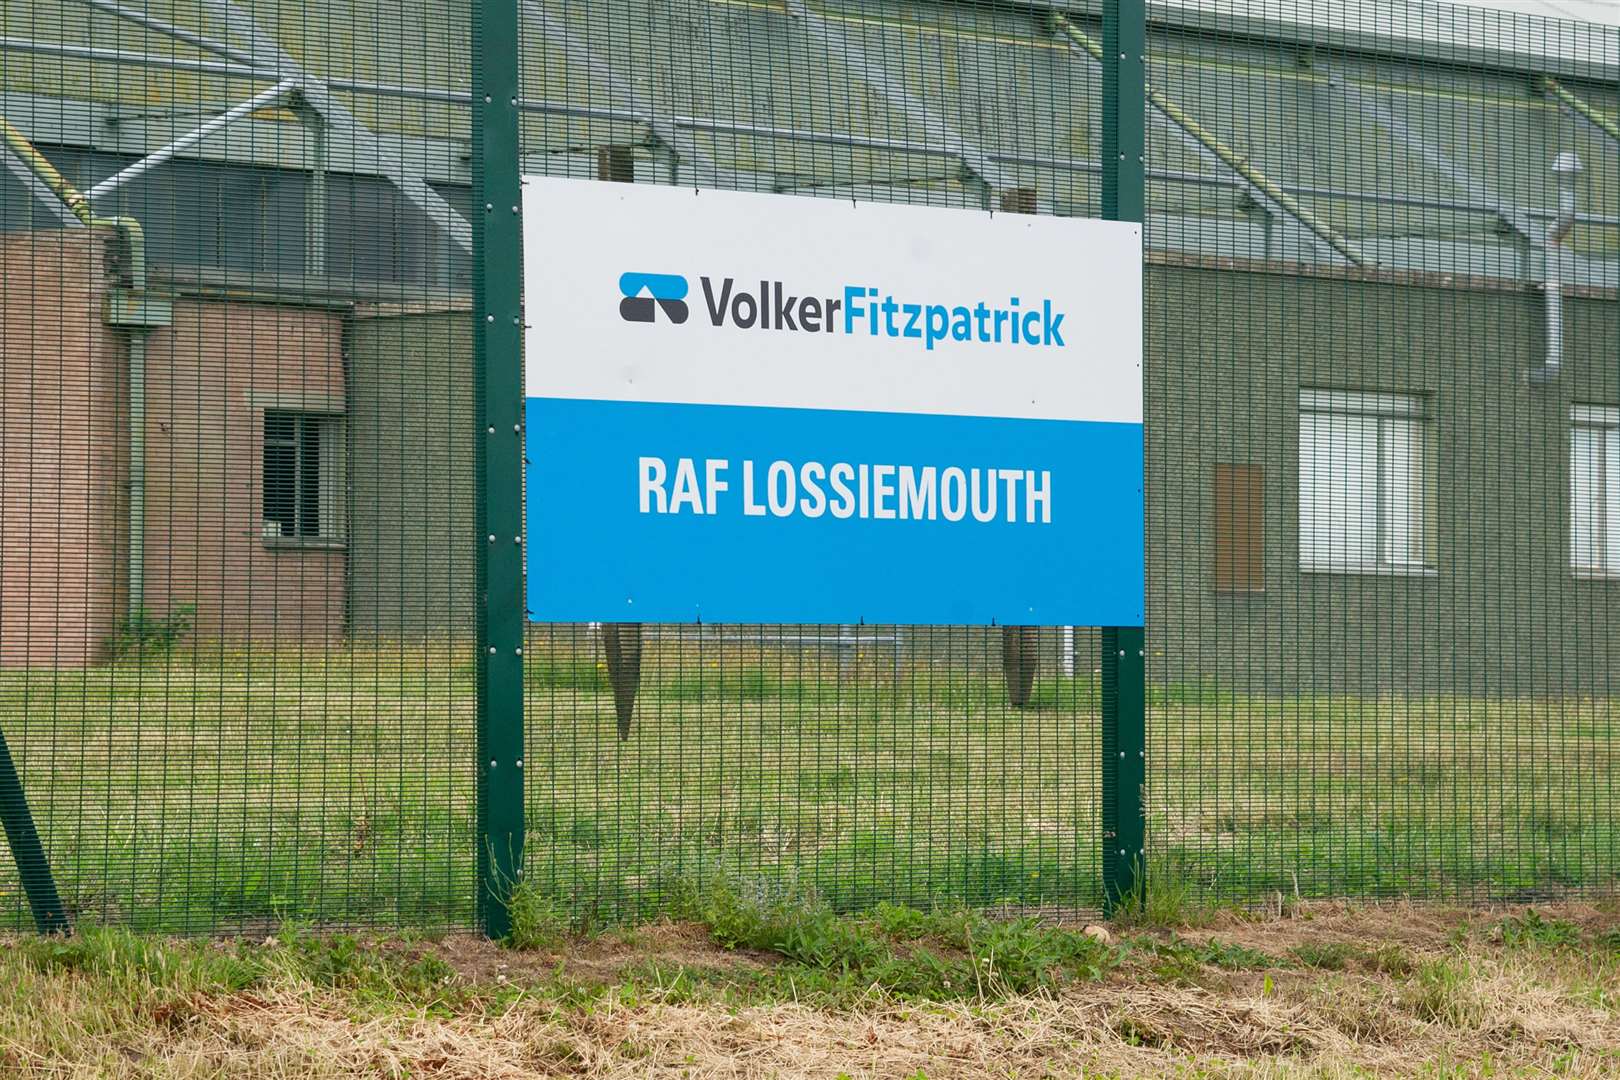 The Volker Fitzpatrick site at RAF Lossiemouth. Picture: Daniel Forsyth.